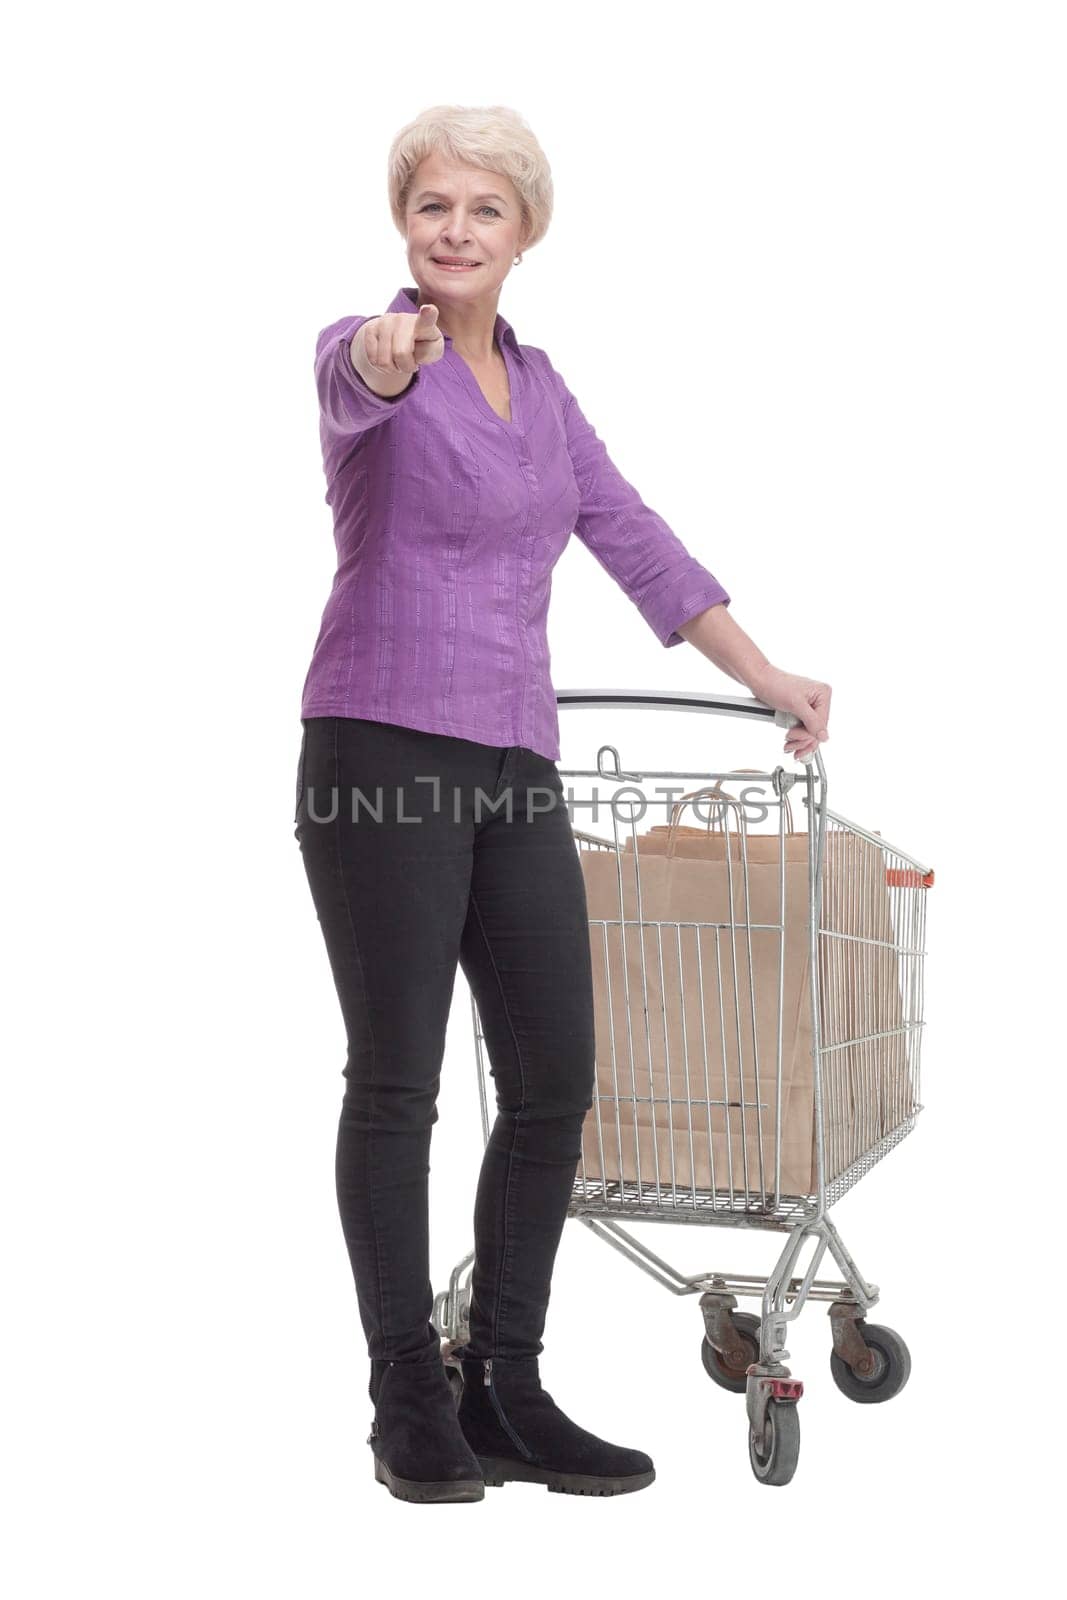 in full growth. casual mature woman with shopping cart. isolated on a white background.